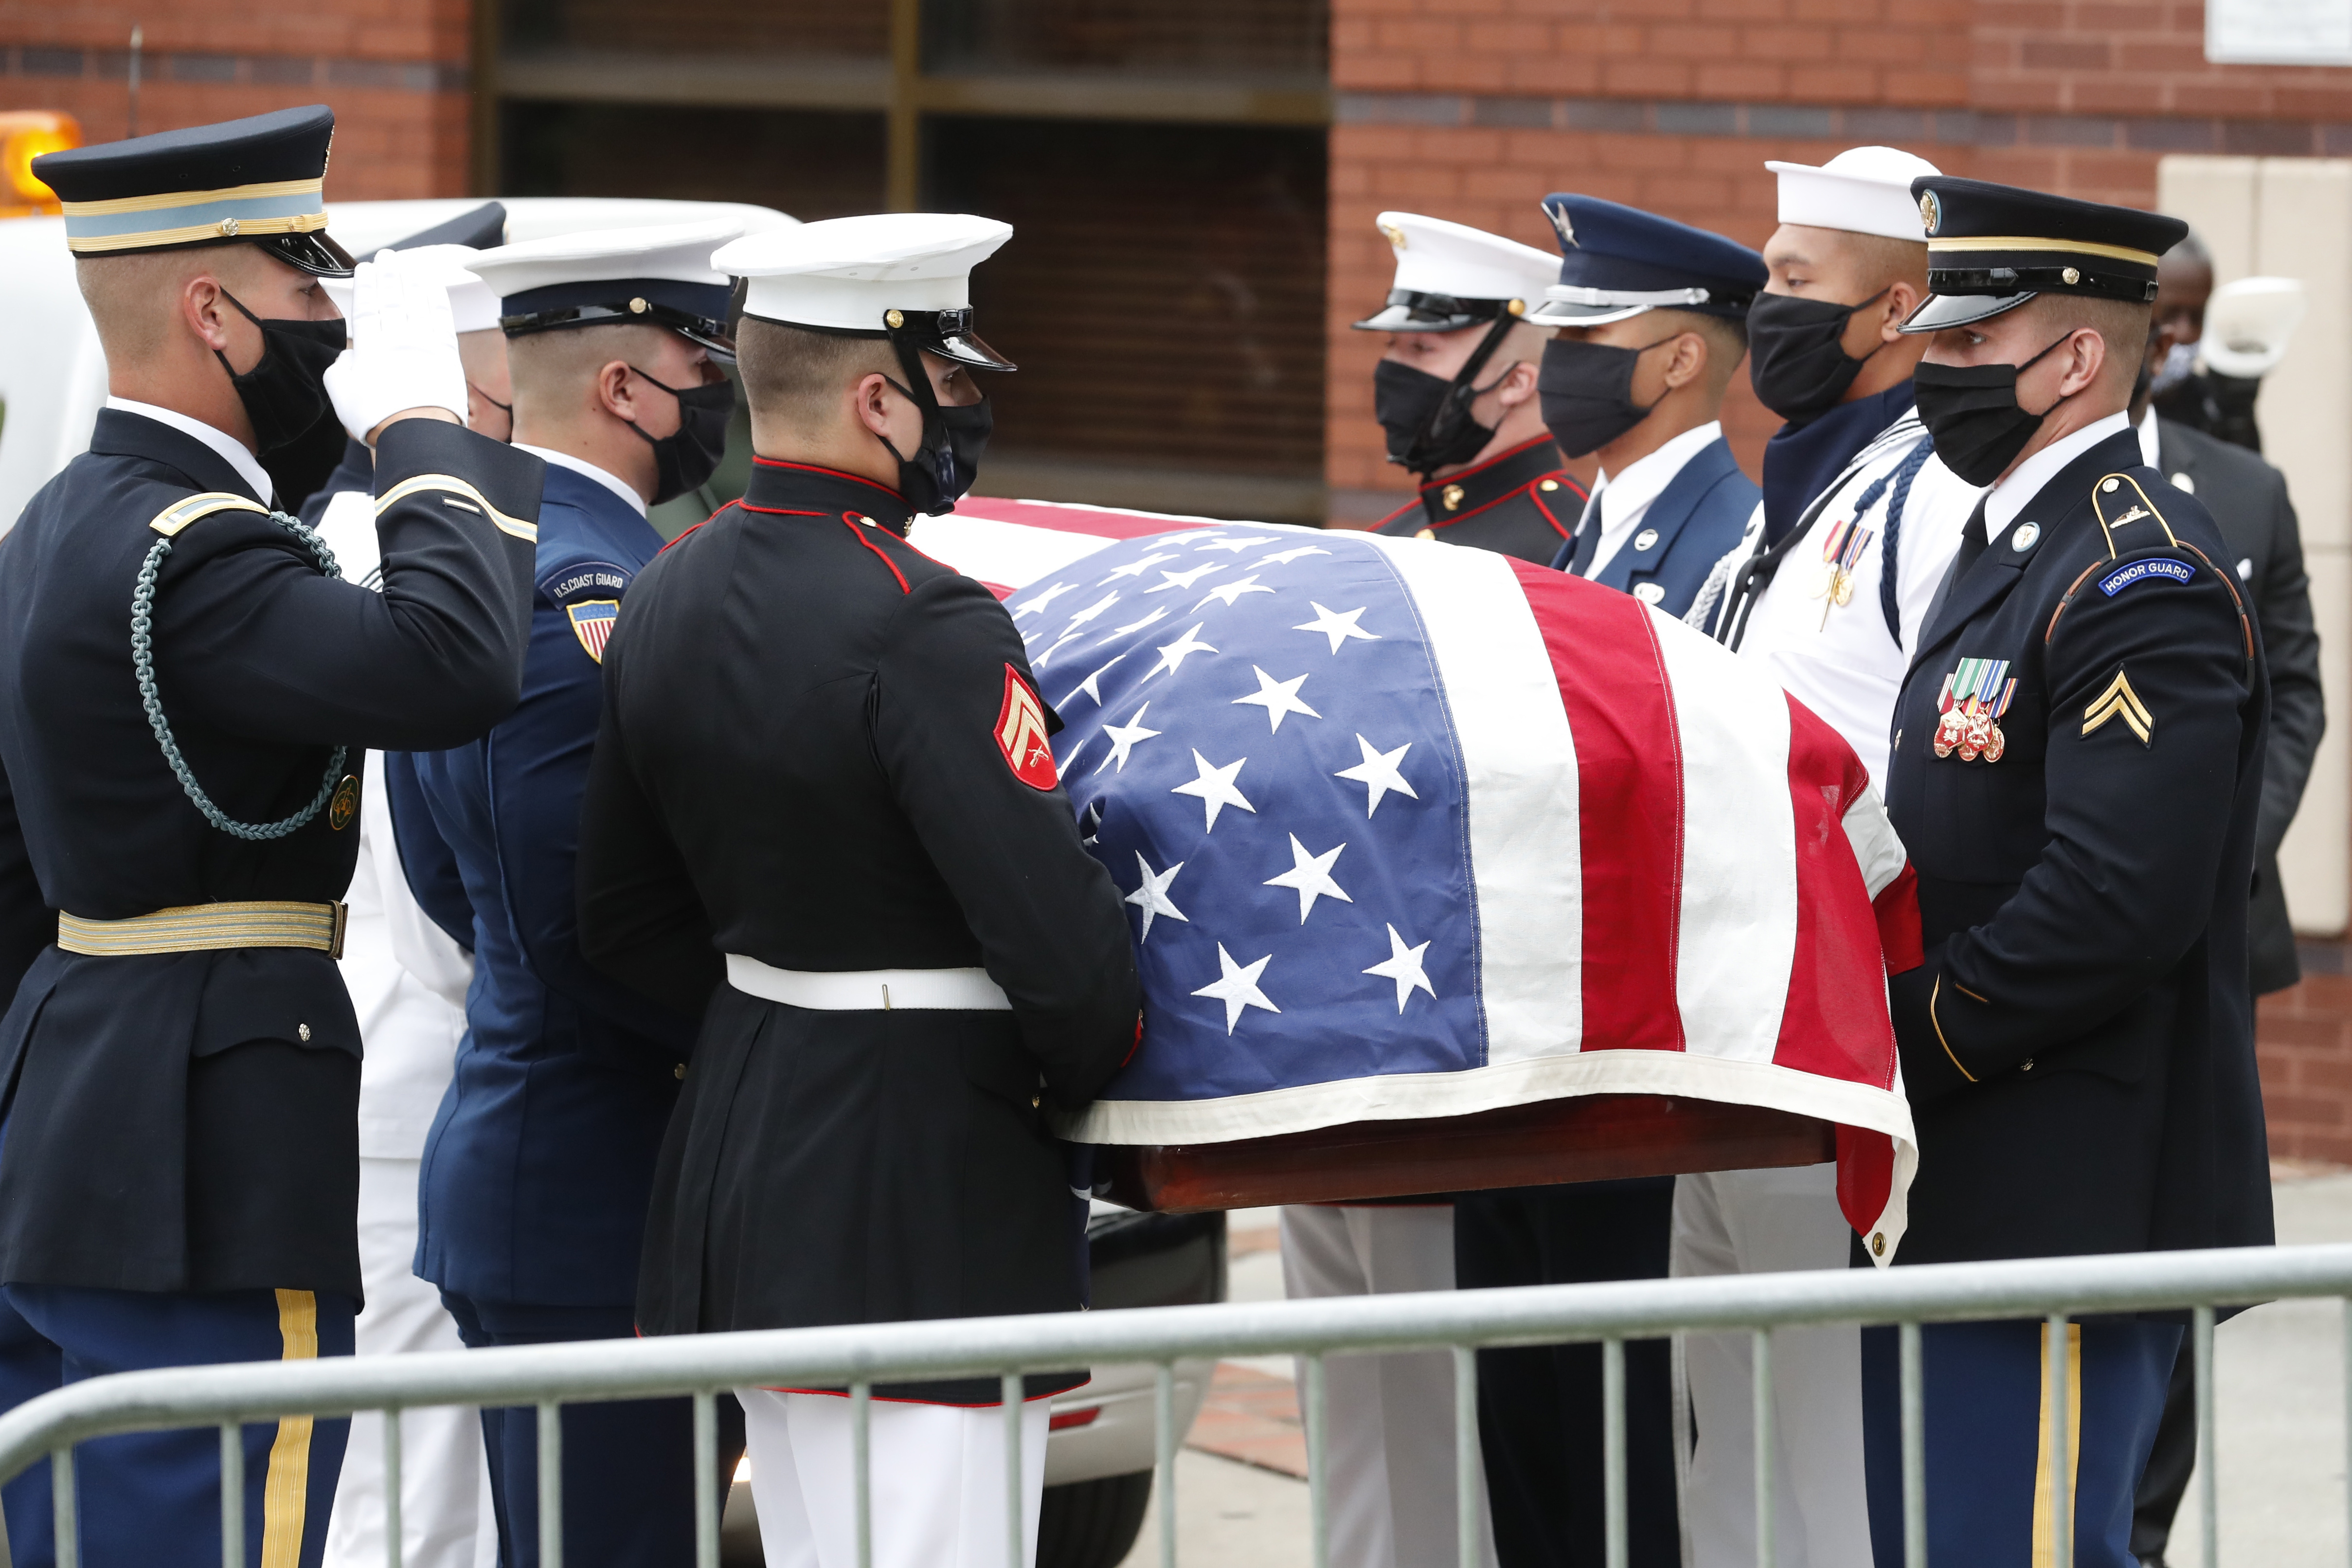 A military honor guard moved the casket of Rep. John Lewis into Ebenezer Baptist Church for his funeral, Thursday in Atlanta.